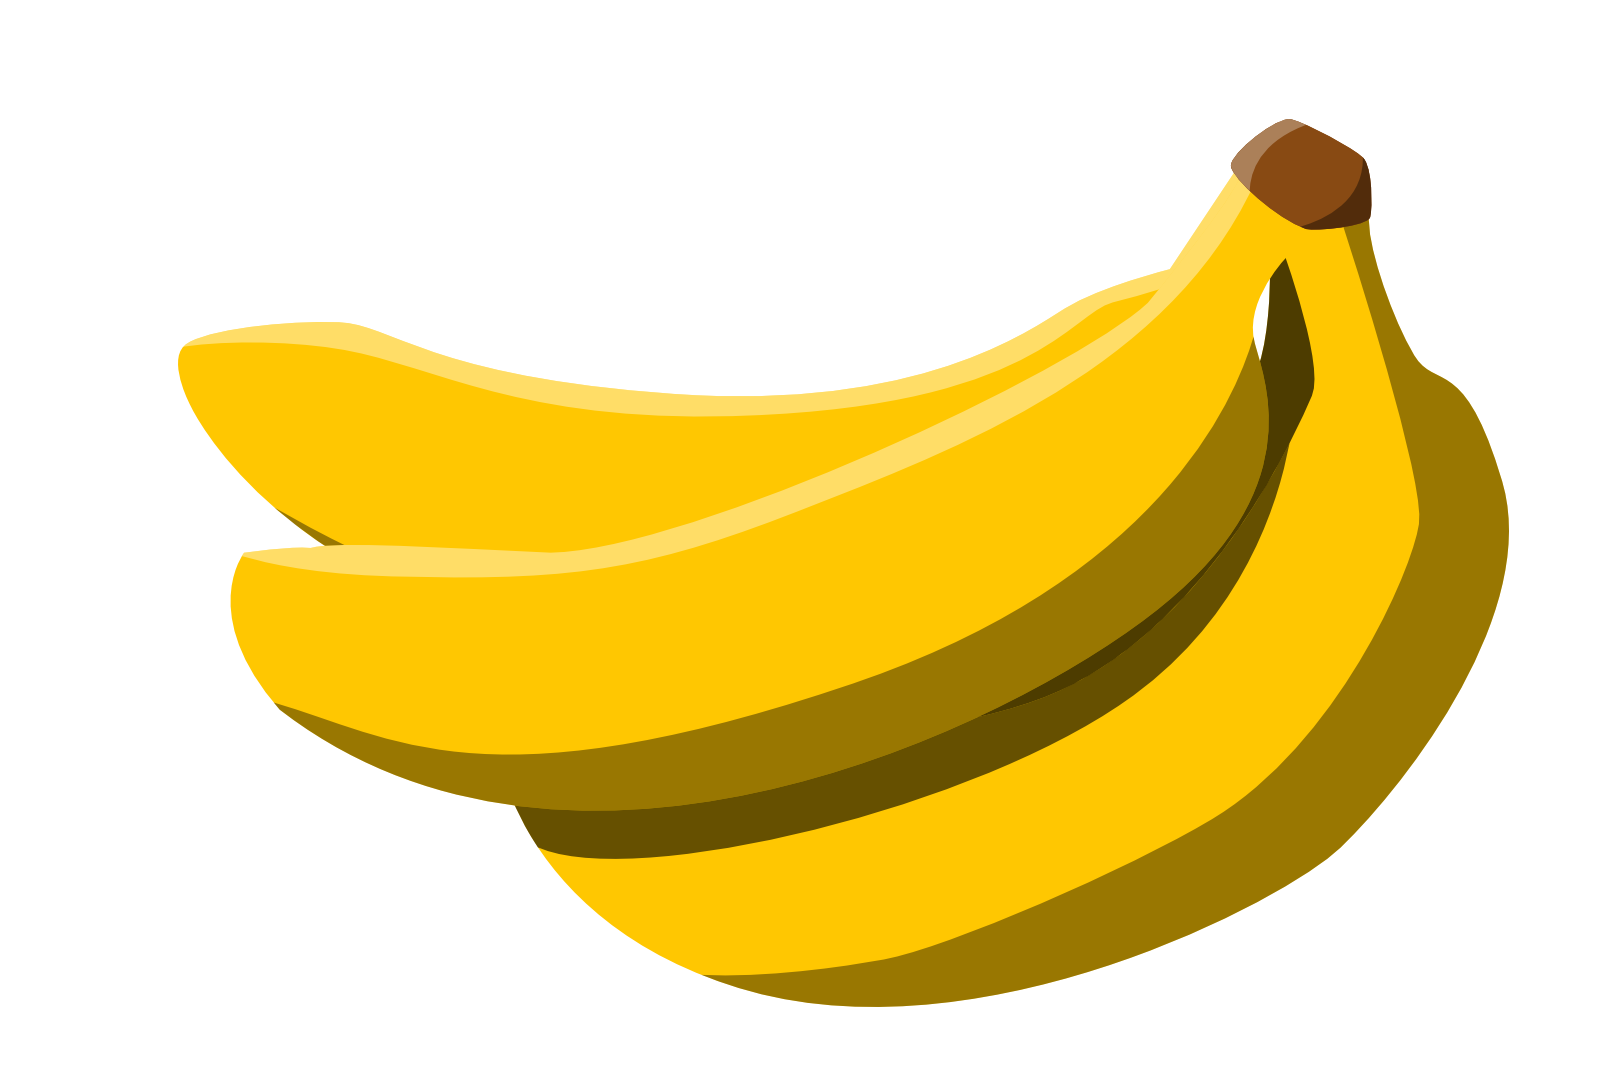 Banana PNG Image in High Definition pngteam.com